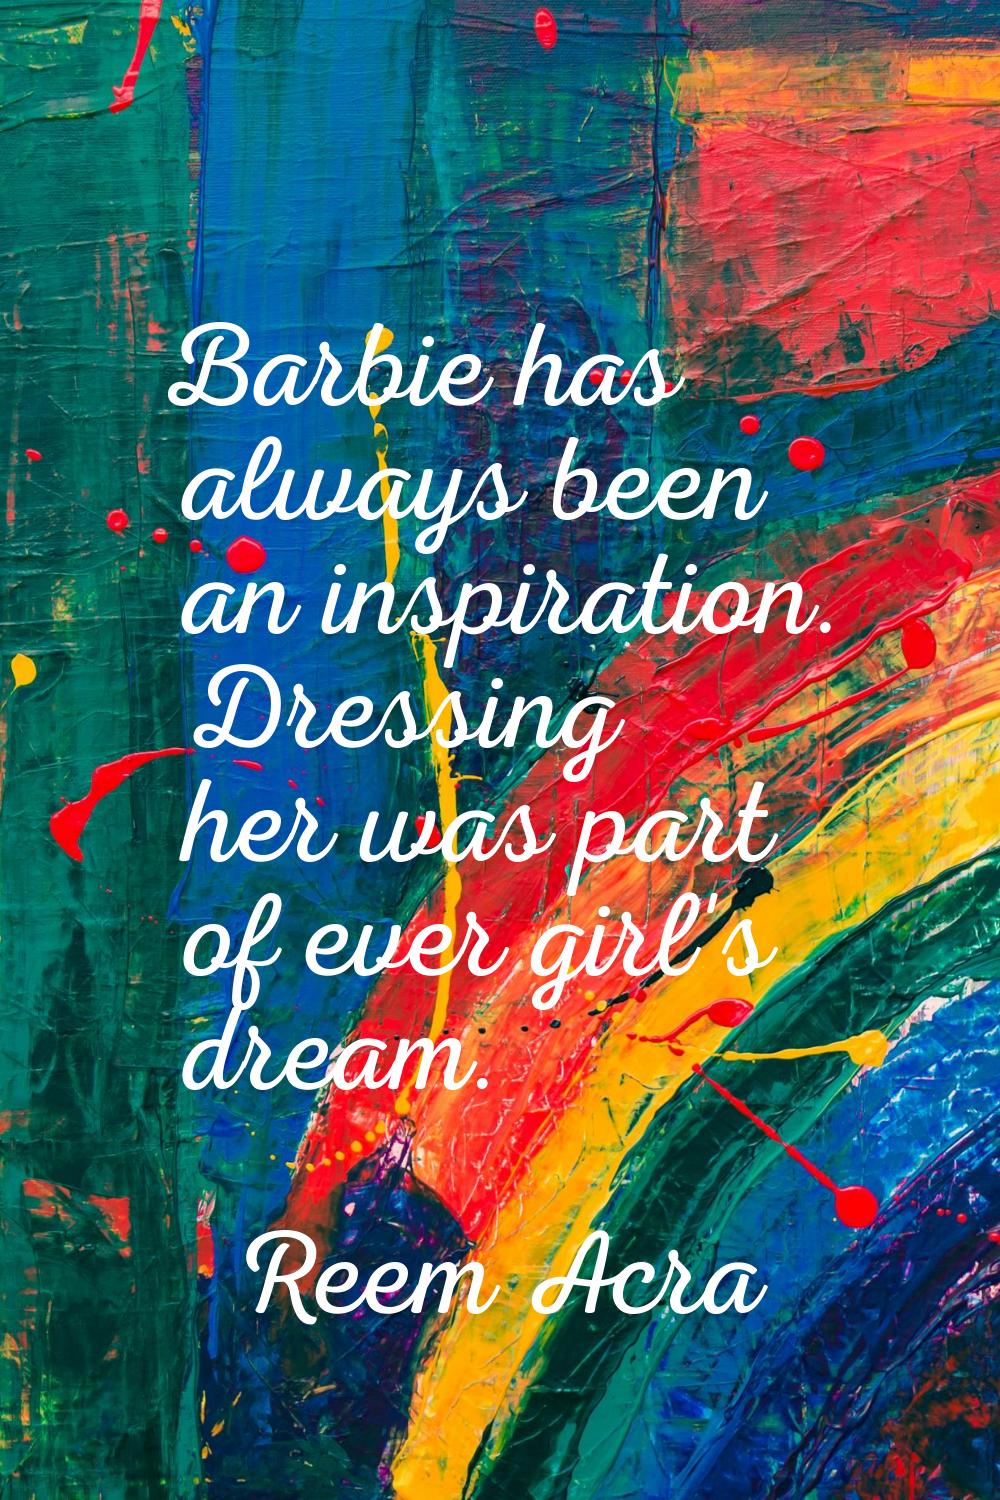 Barbie has always been an inspiration. Dressing her was part of ever girl's dream.